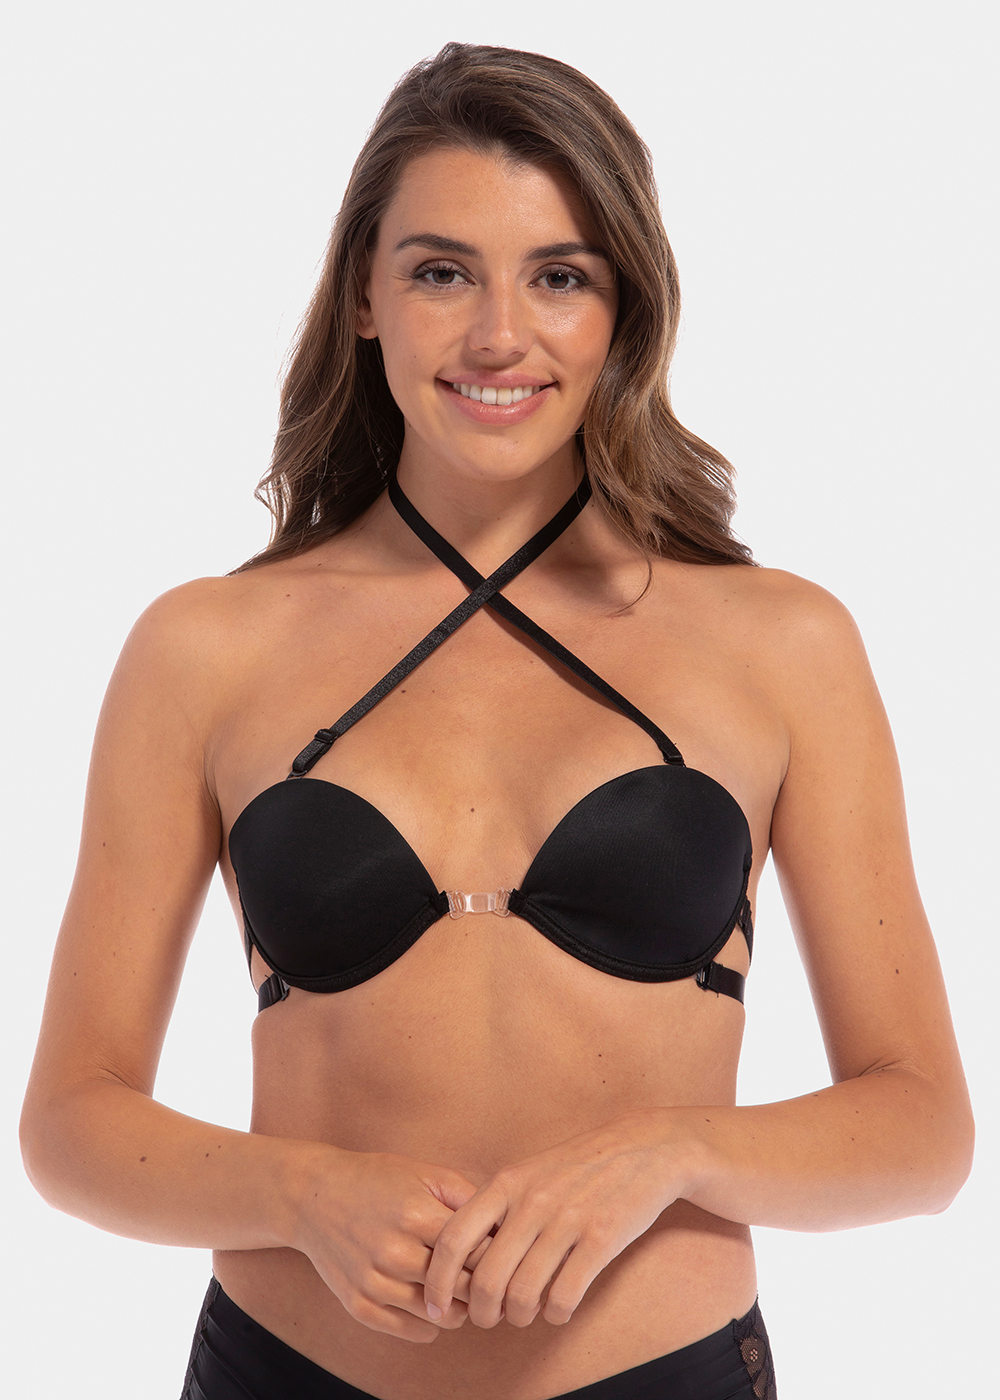 5 Types of Bras to Wear with Halter Dresses